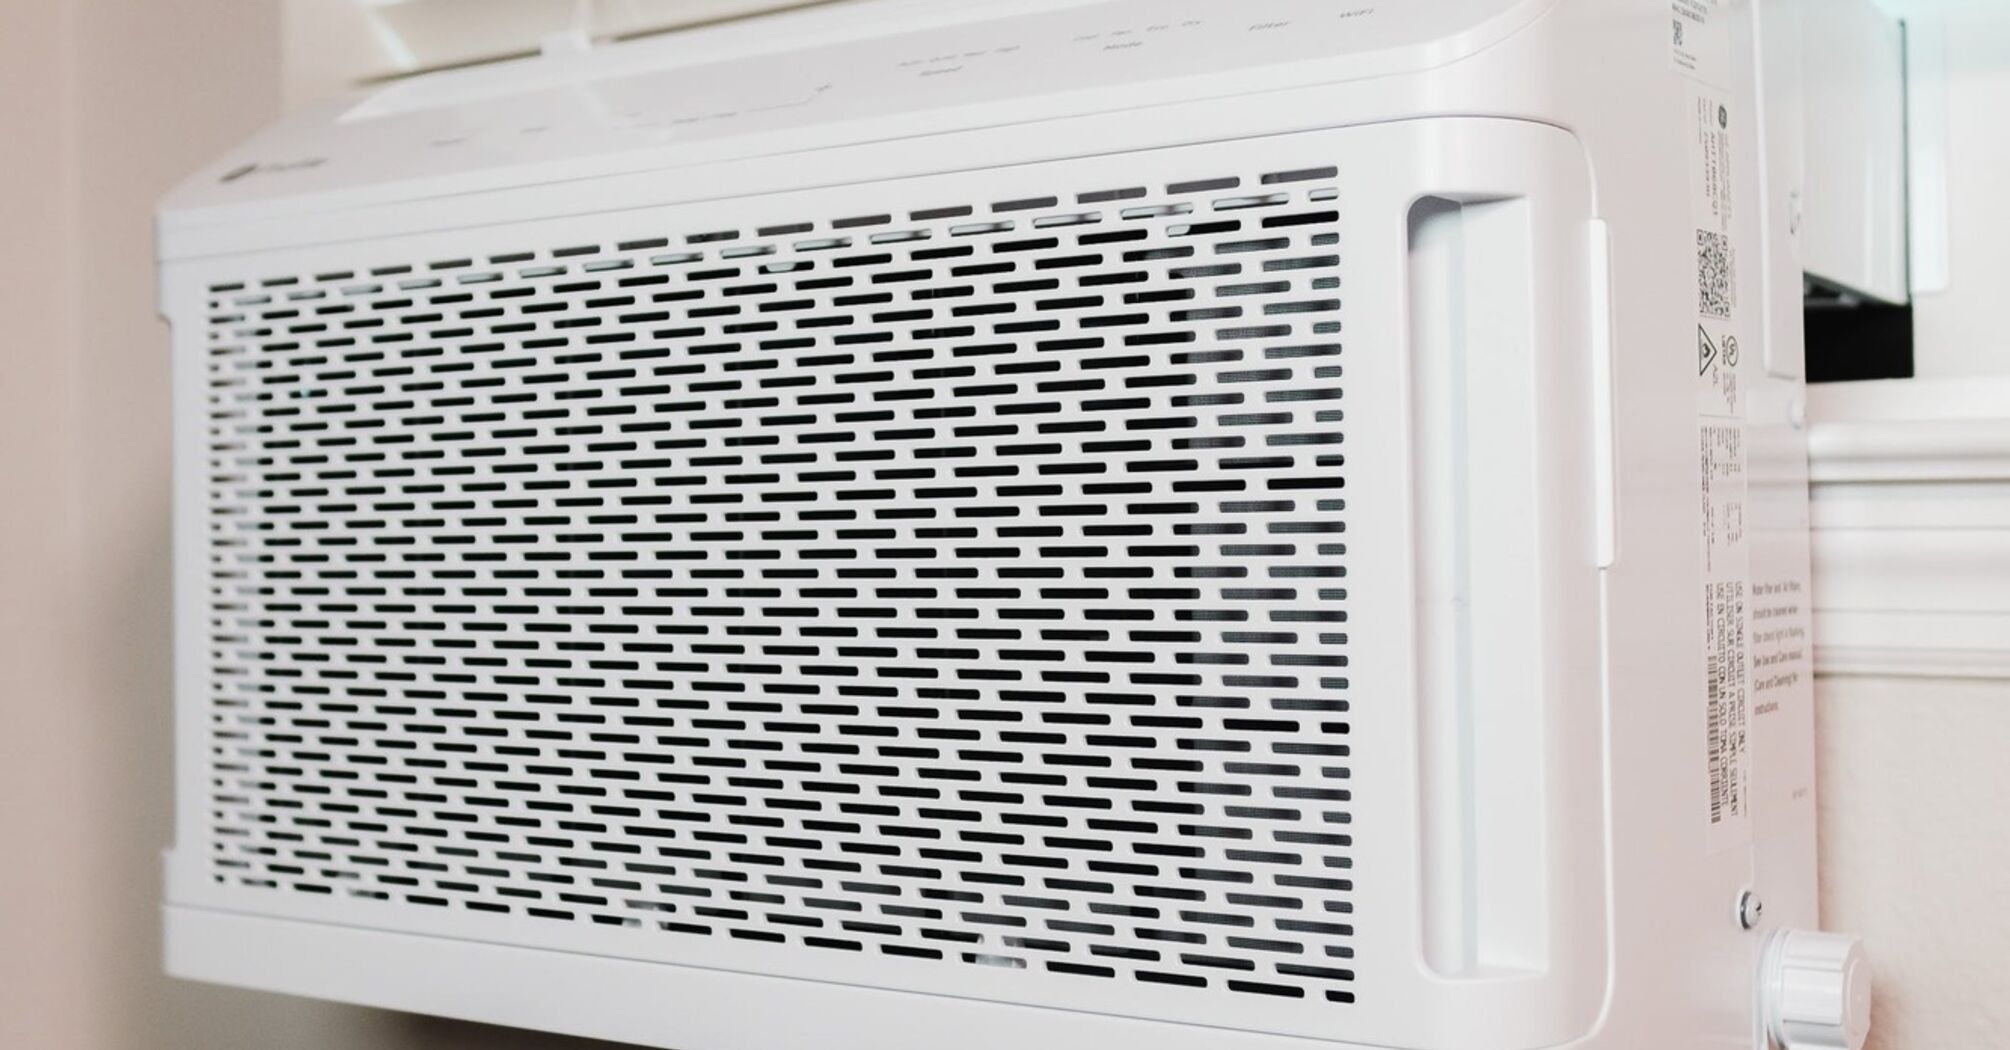 Top 5 myths about using air conditioning: What you should know